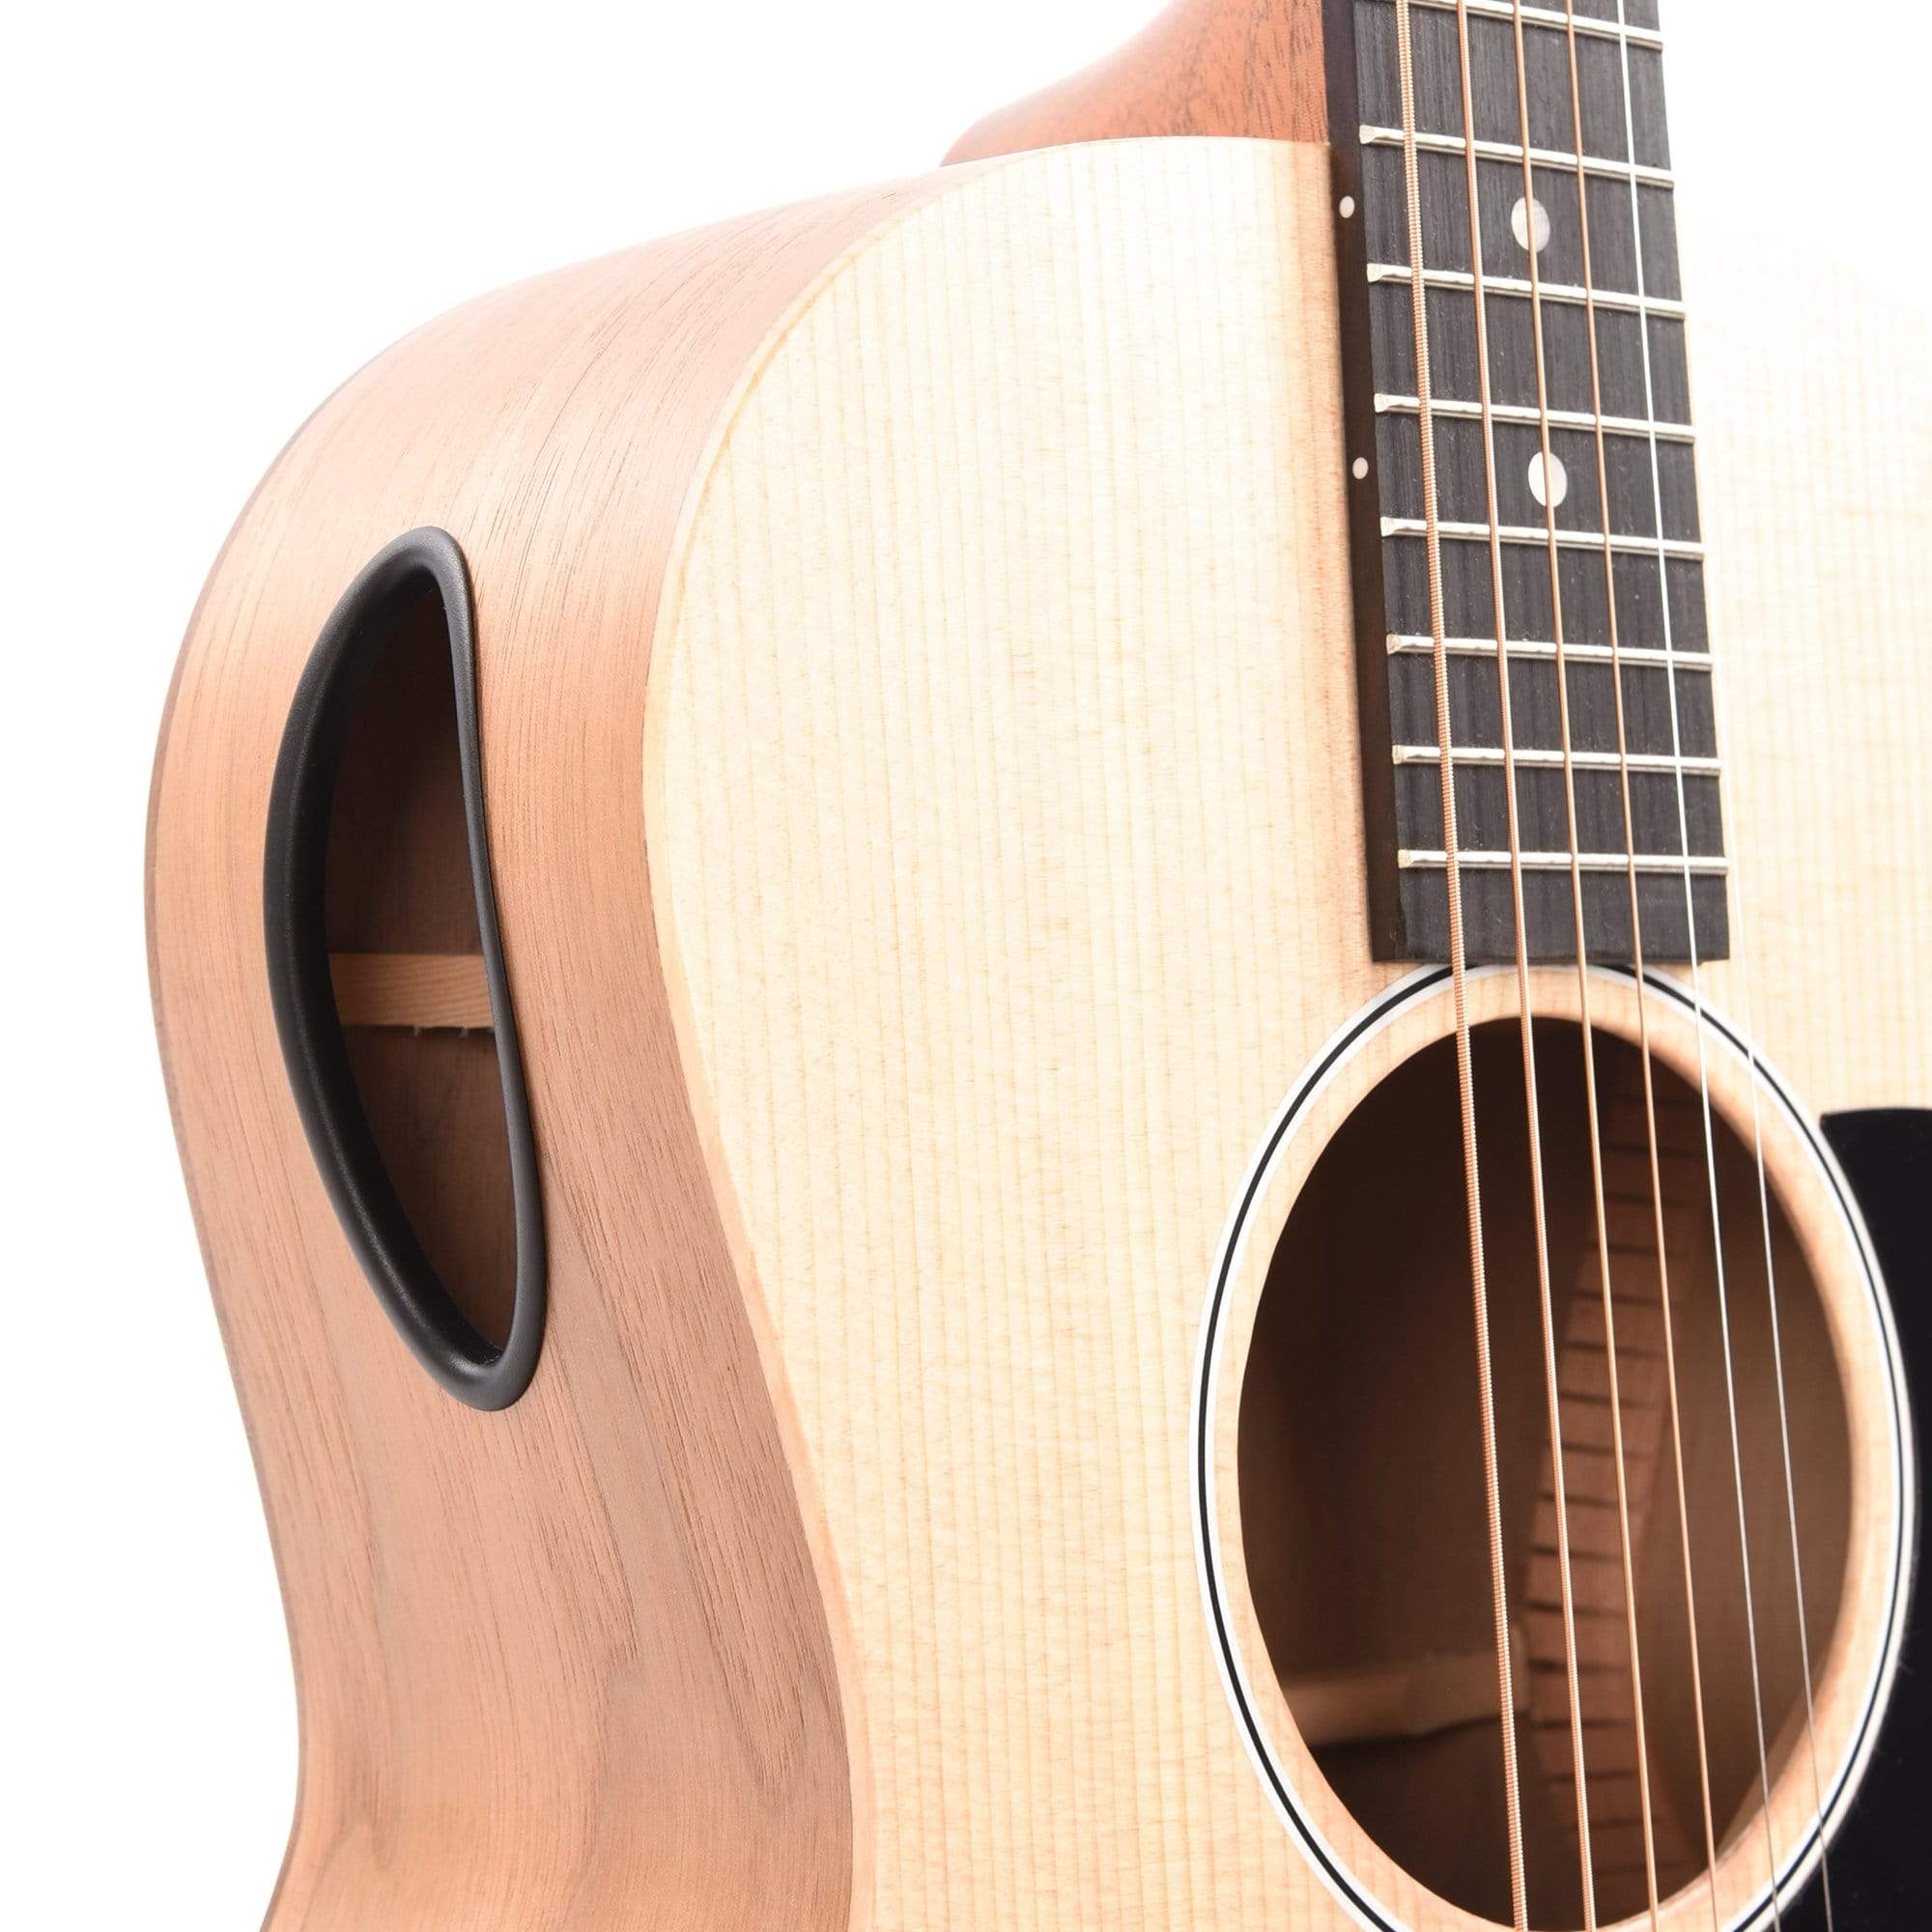 Gibson Generation G-00 Sitka/Walnut Natural Acoustic Guitars / Parlor